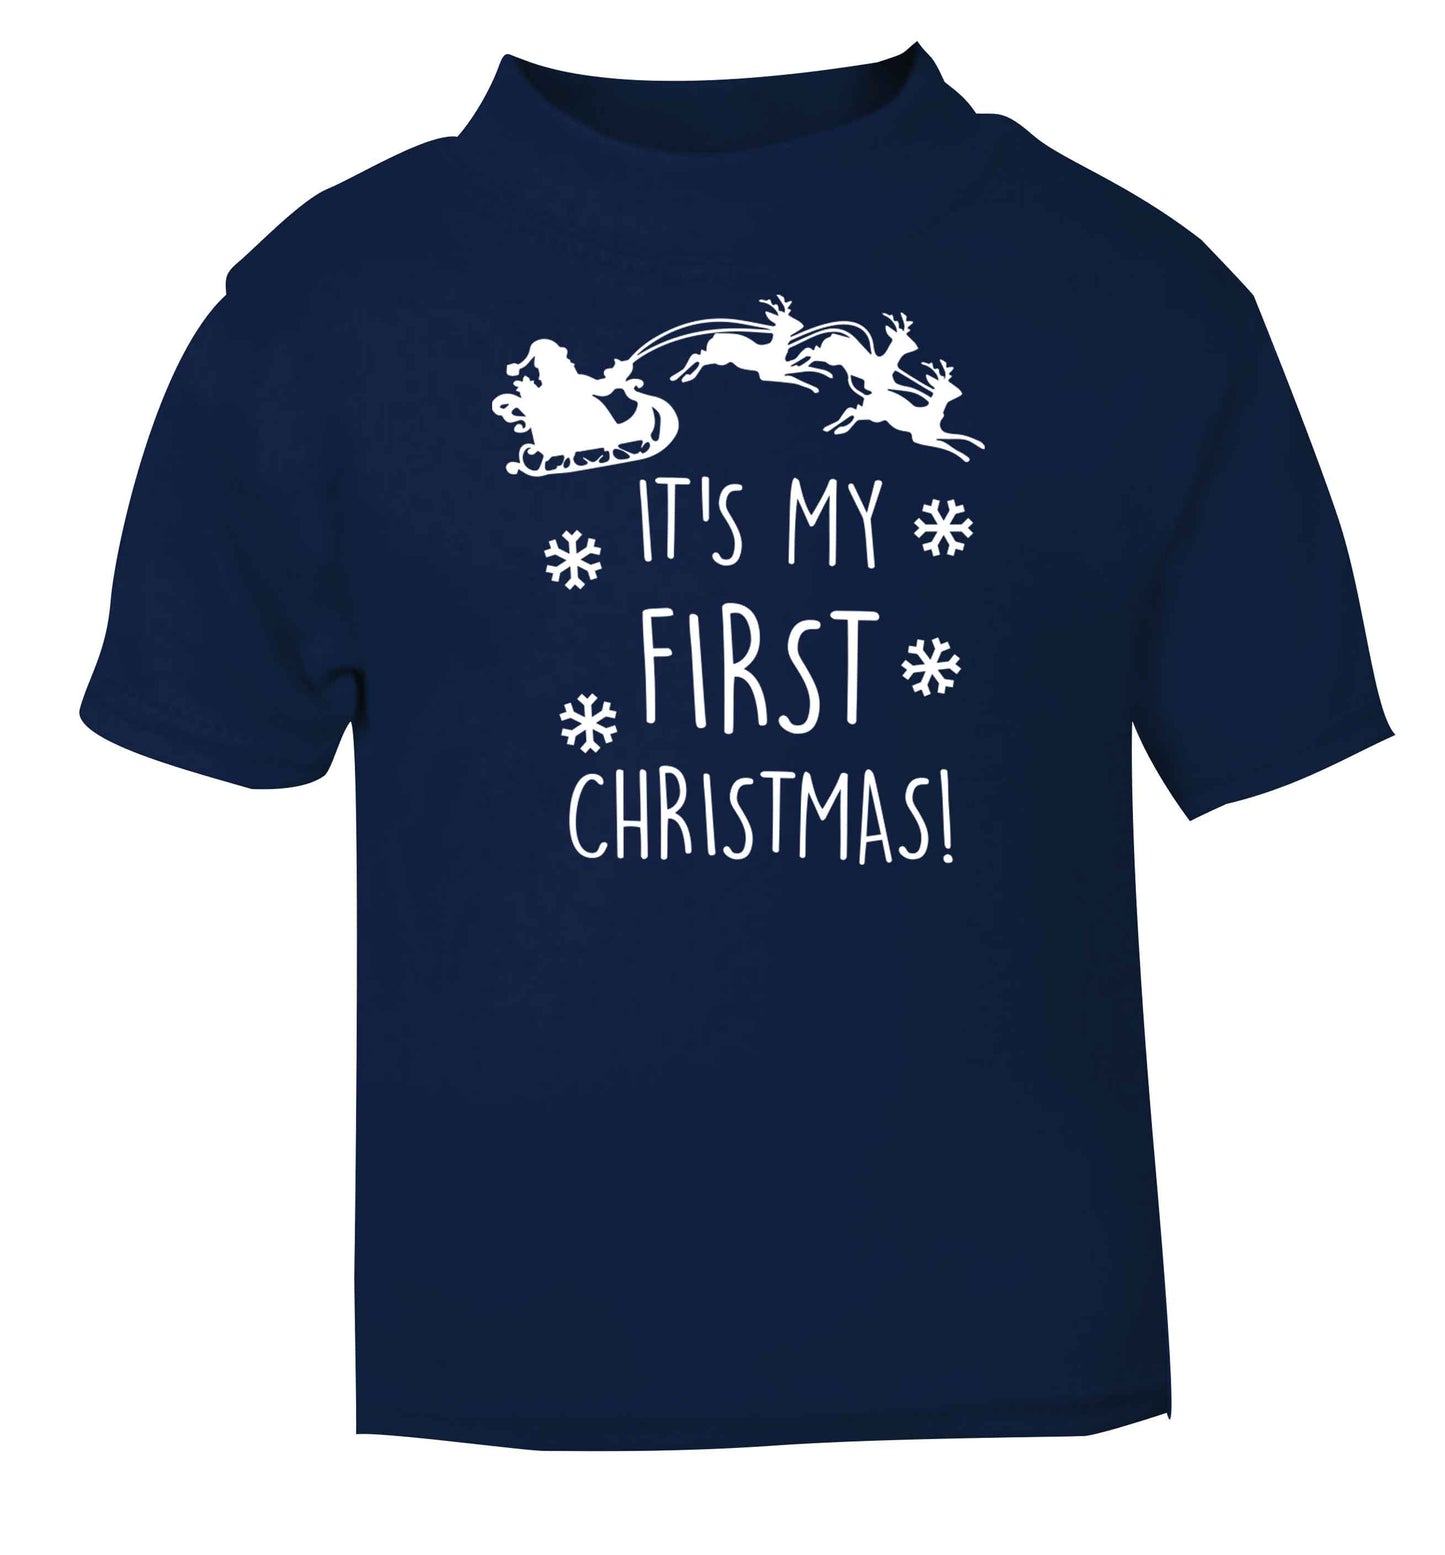 It's my first Christmas - Santa sleigh text navy baby toddler Tshirt 2 Years